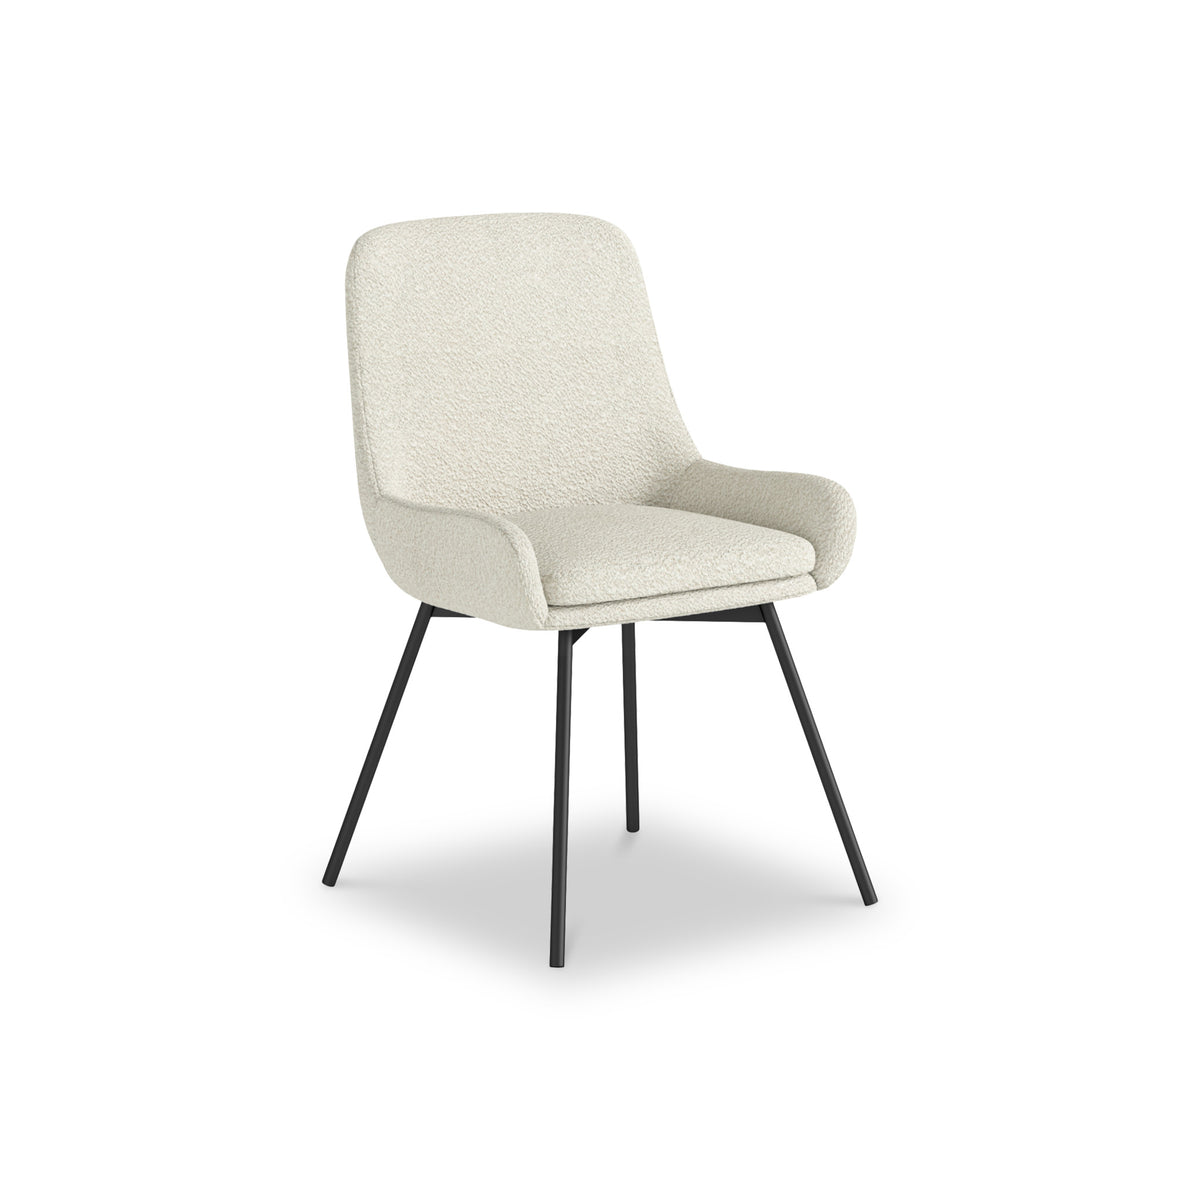 Shorwell Ivory Boucle Curved Seat Dining Chair from Roseland Furniture